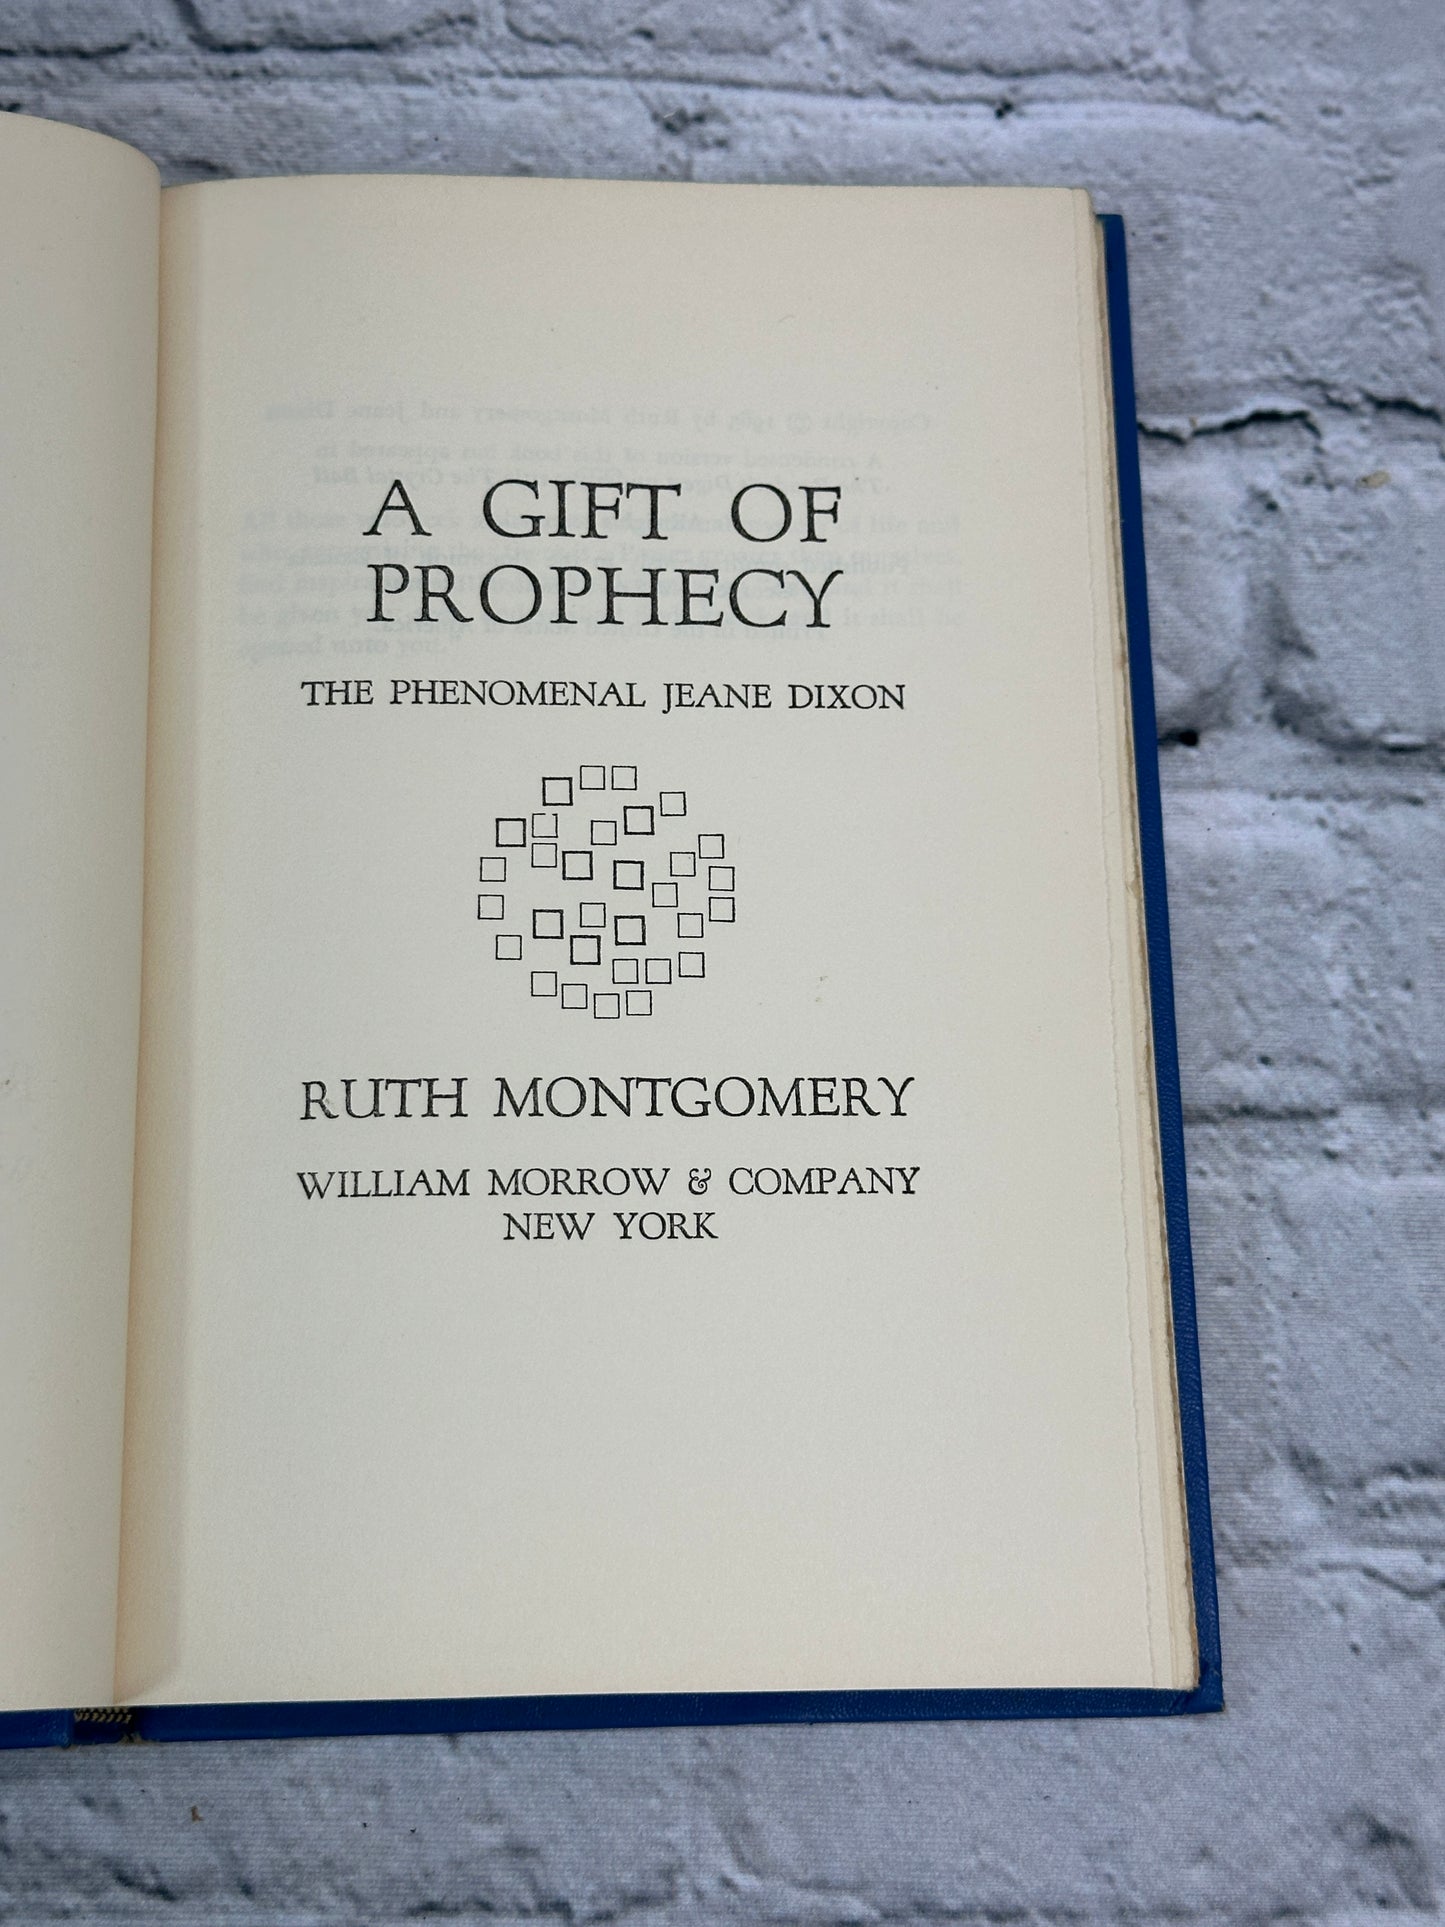 A Gift of Prophecy: The Phenomenal Jeane Dixon by Ruth Montgomery [1965 · BCE]